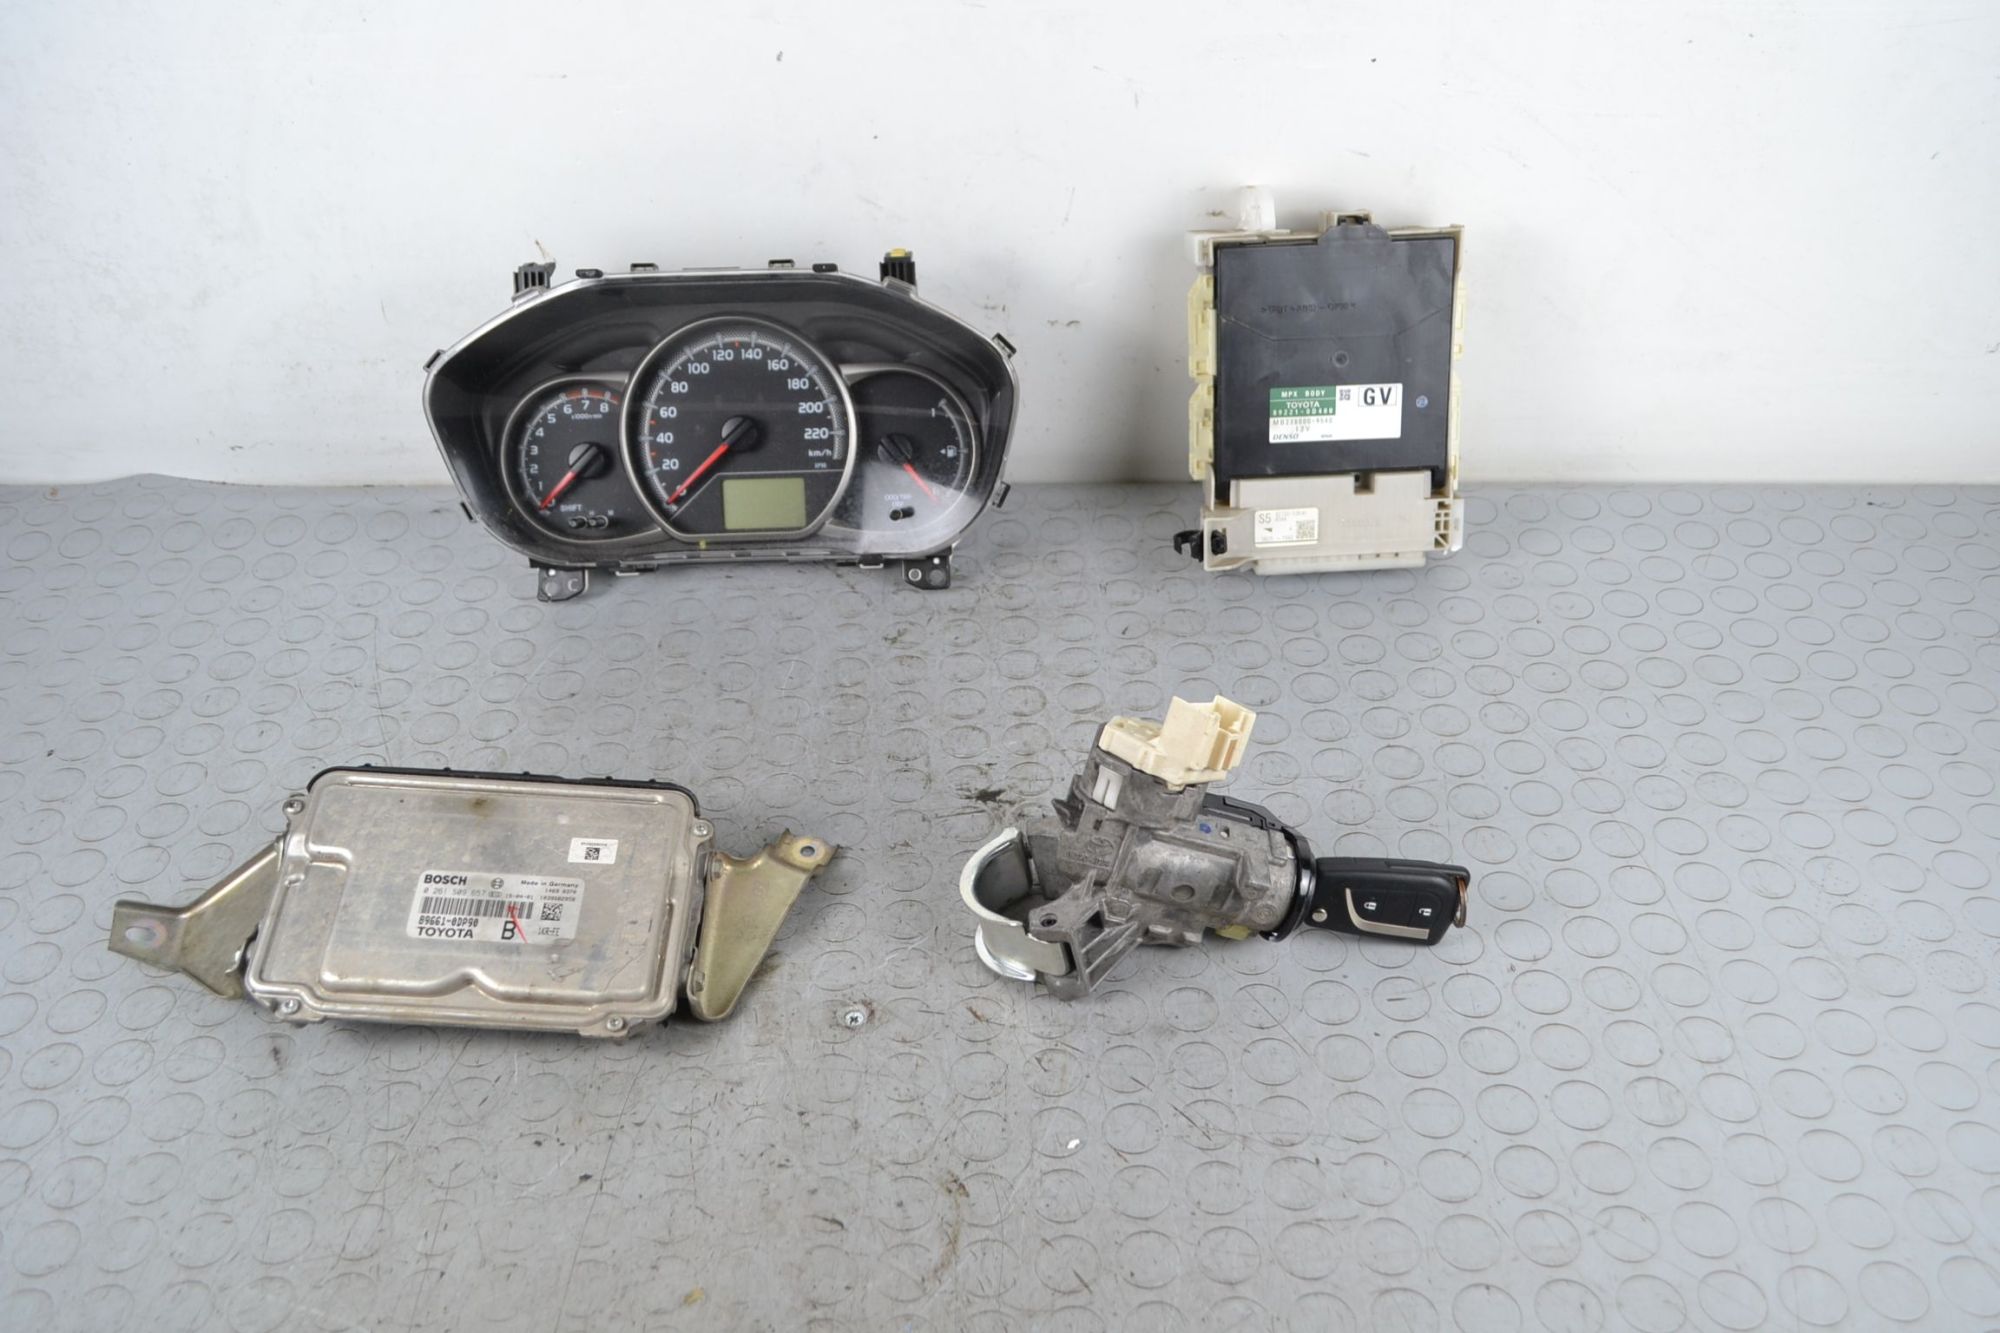 Kit chiave accensione elettronica Toyota Yaris III P13 1.0 51 KW 69CV dal 12/2010 in poi Cod 89661-0DP90  1699287872074